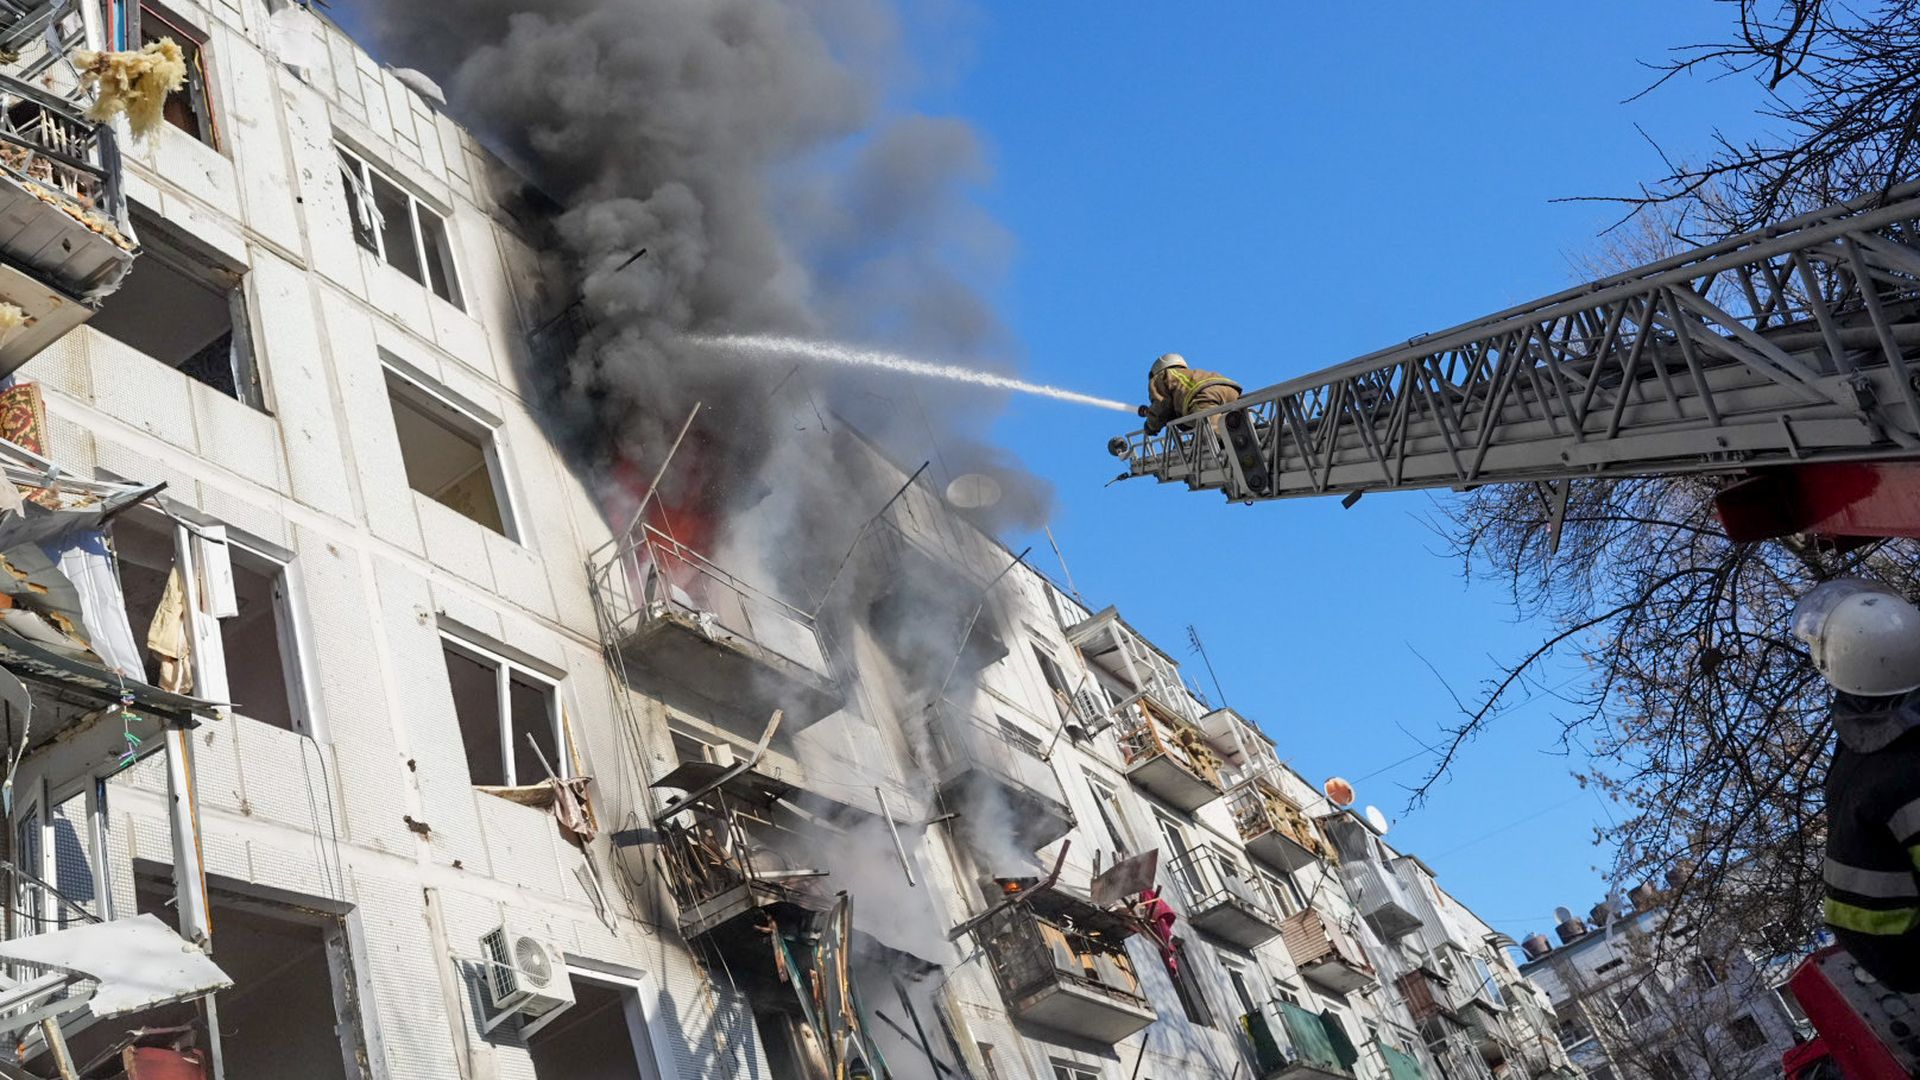 Ukrainian firefighters try to extinguish a fire after an airstrike hit an apartment complex in Chuhuiv, Kharkiv Oblast, Ukraine on February 24.